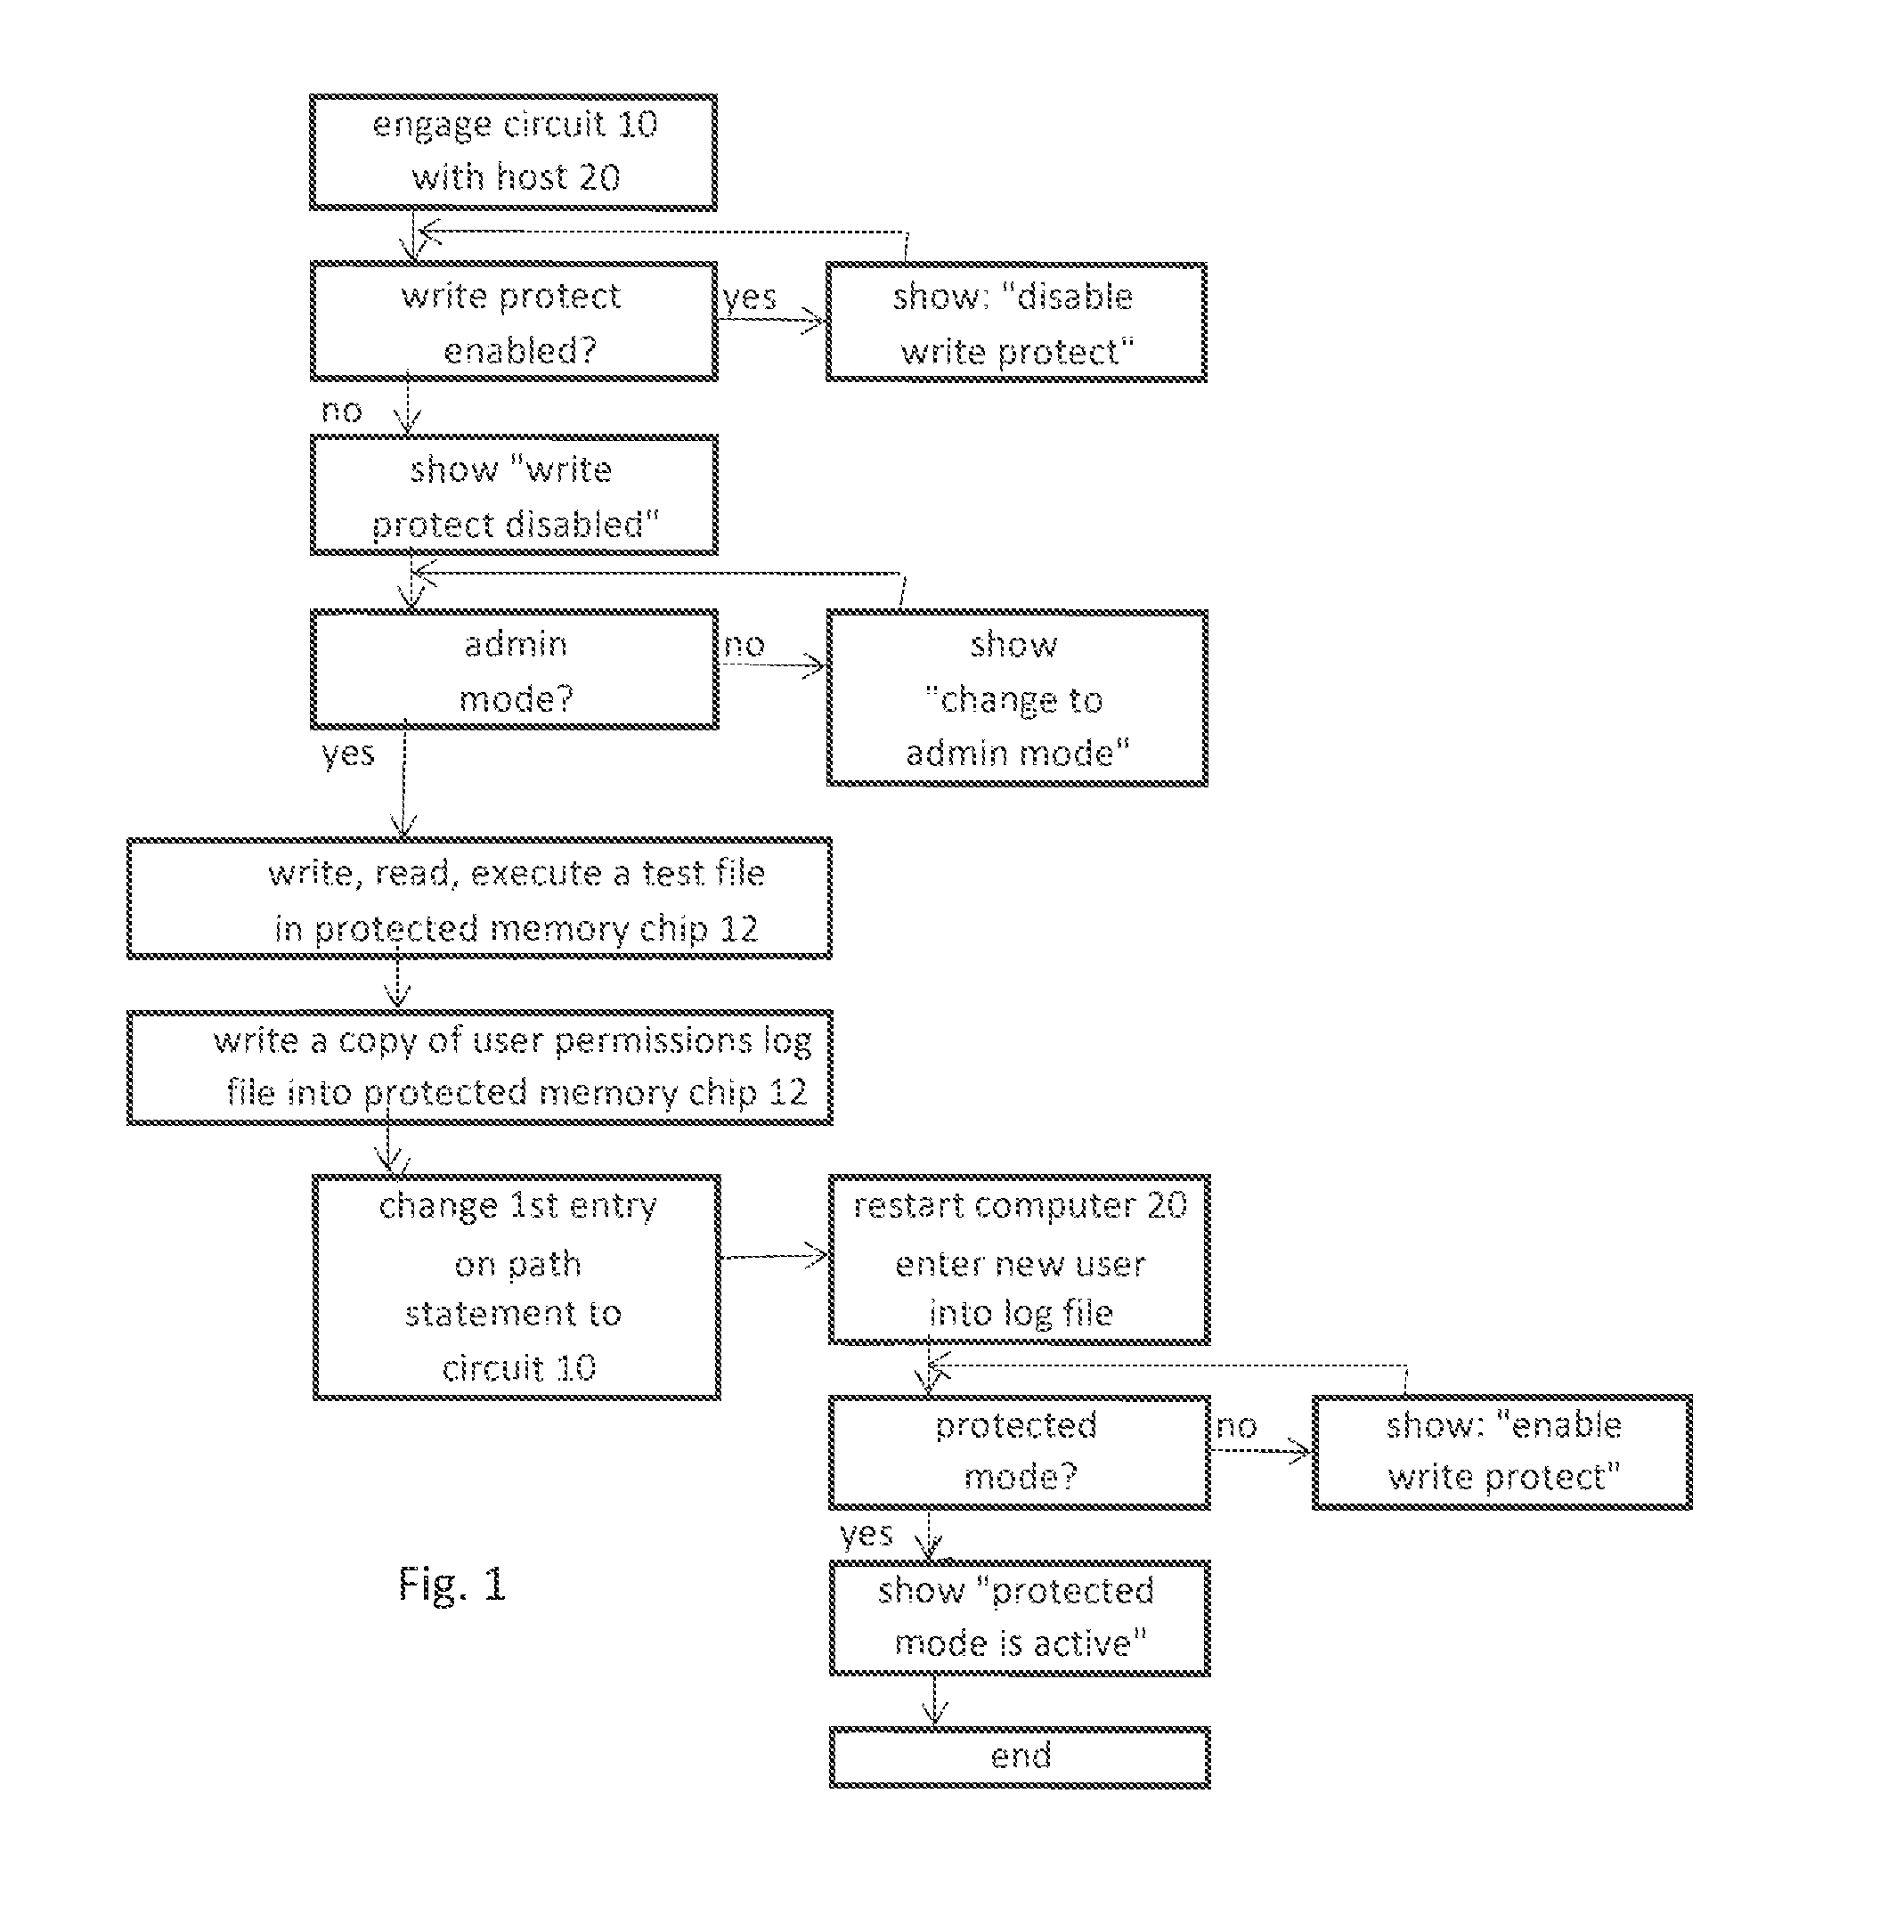 Method for Securing Computers from Malicious Code Attacks